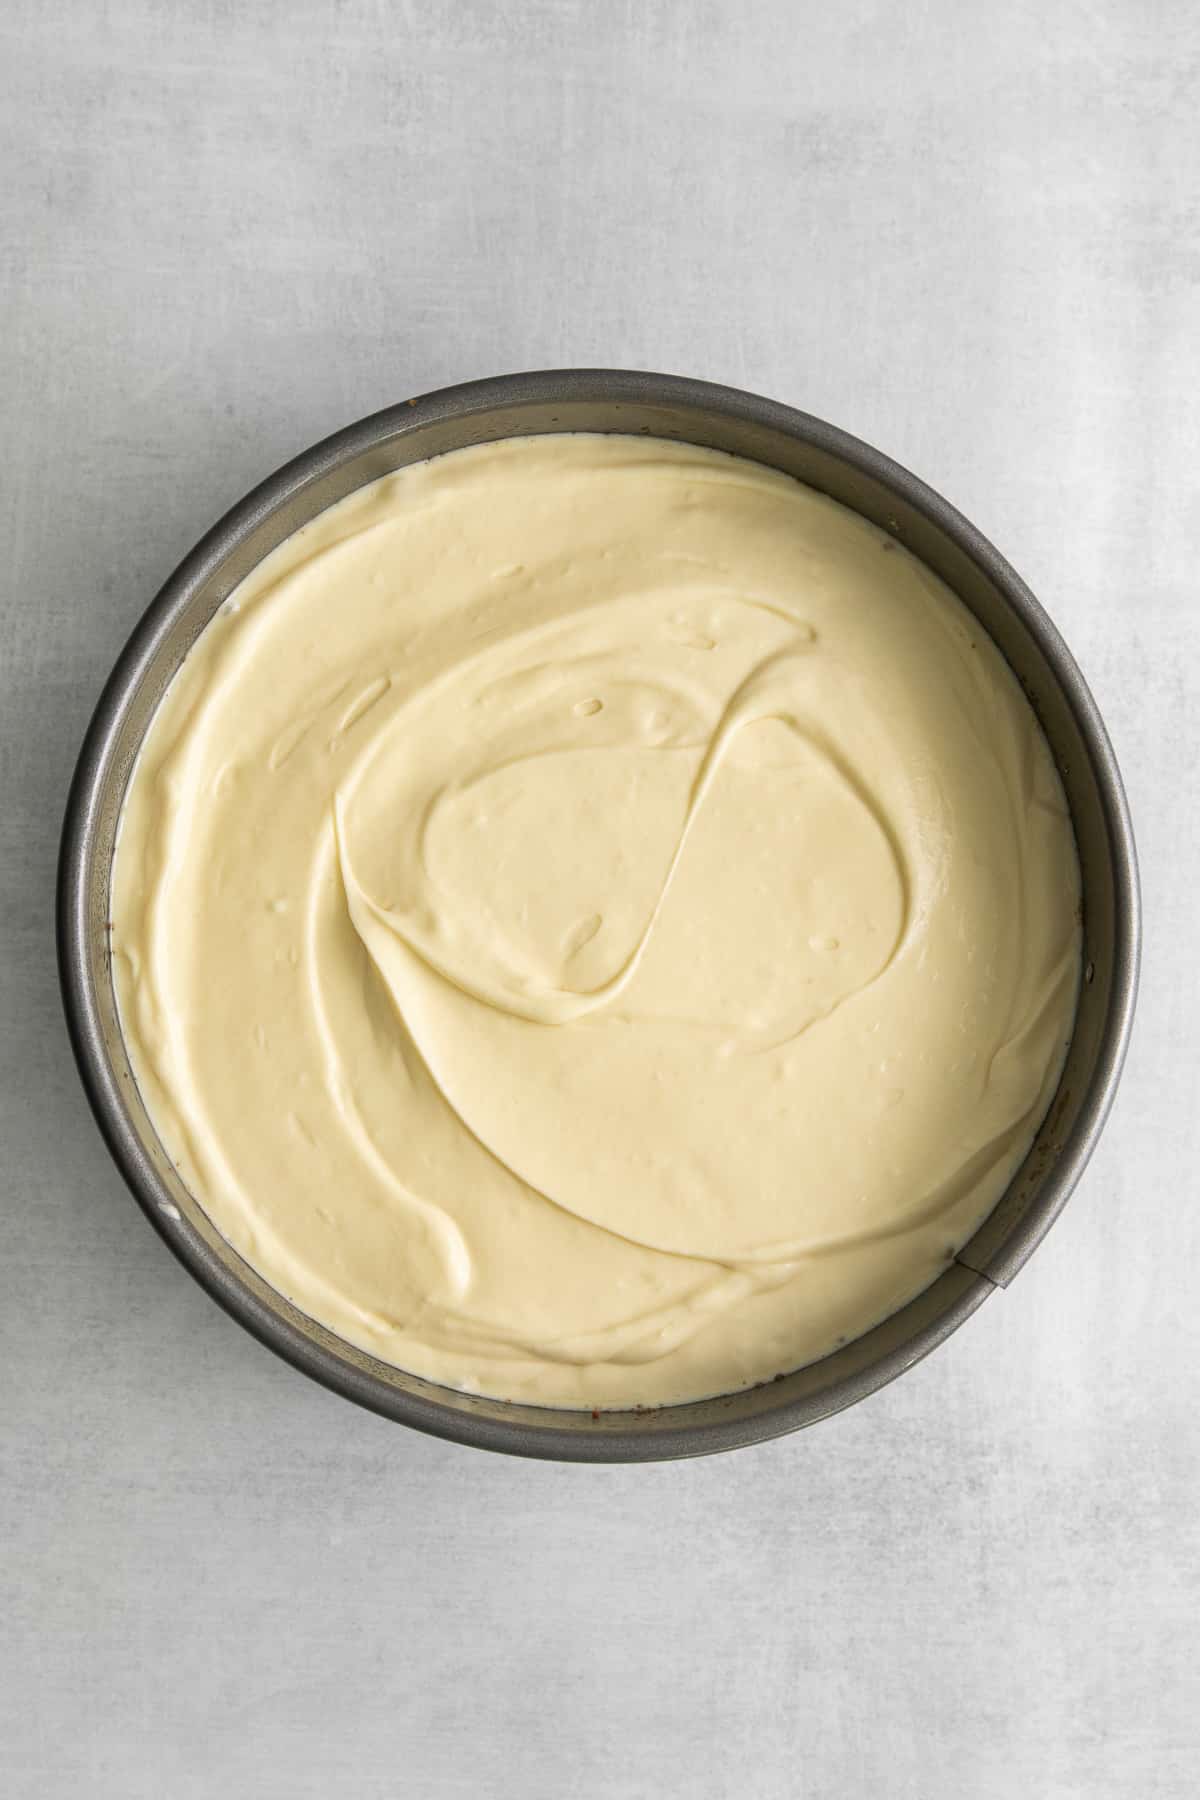 Mascarpone cheesecake batter in a spring form pan.